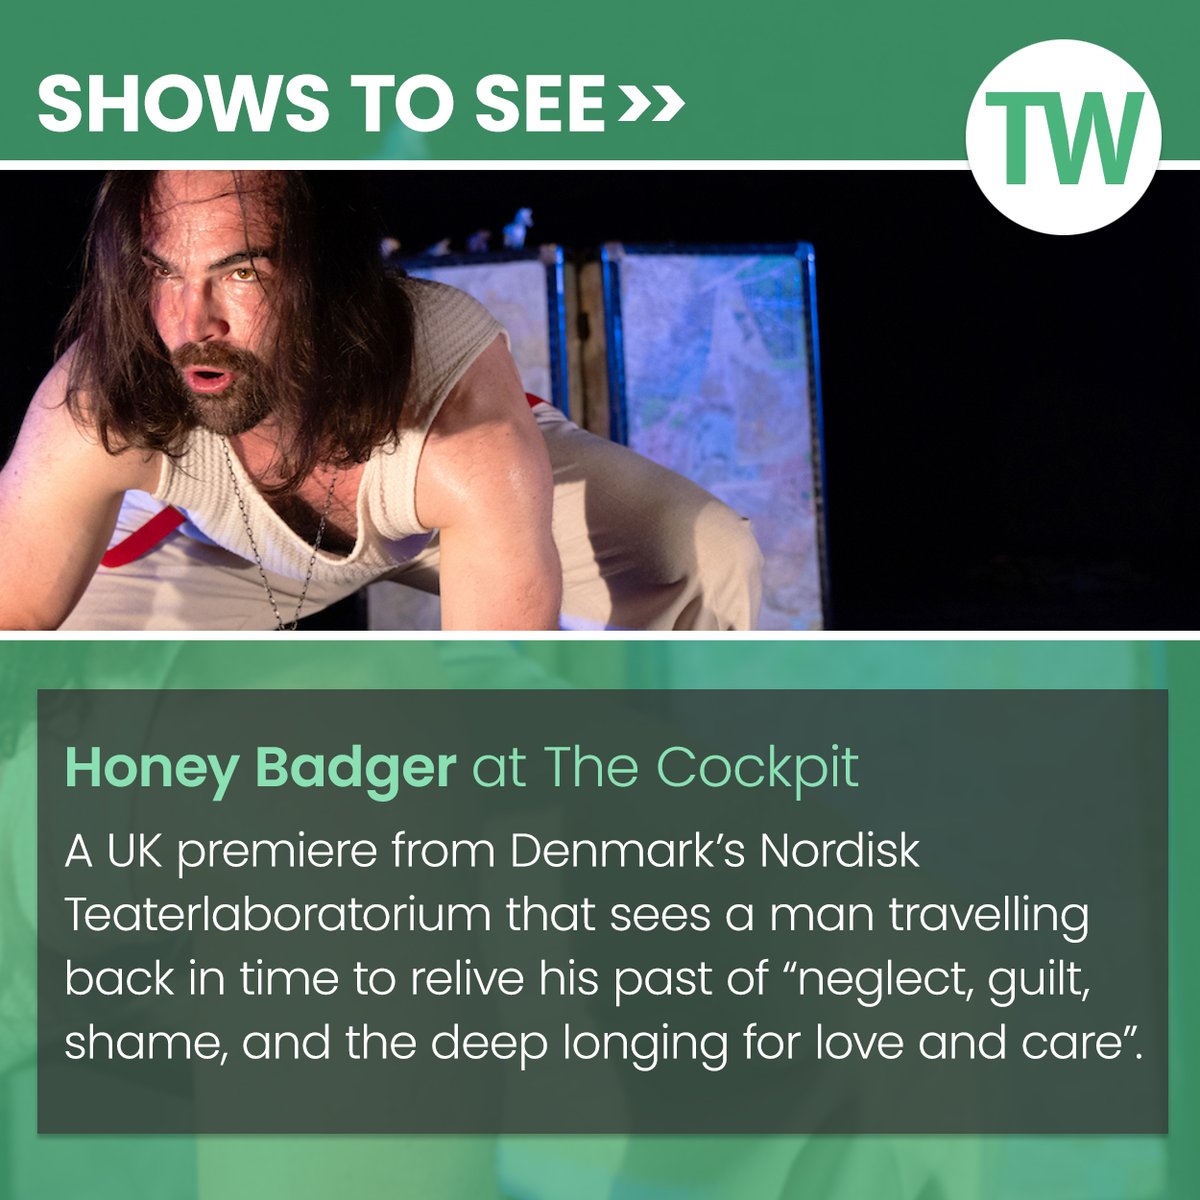 Among our recommended shows to see this week: ‘Honey Badger’ by Nordisk Teaterlaboratorium at The Cockpit. Get more show tips here: bit.ly/3TORapH @cockpittheatre